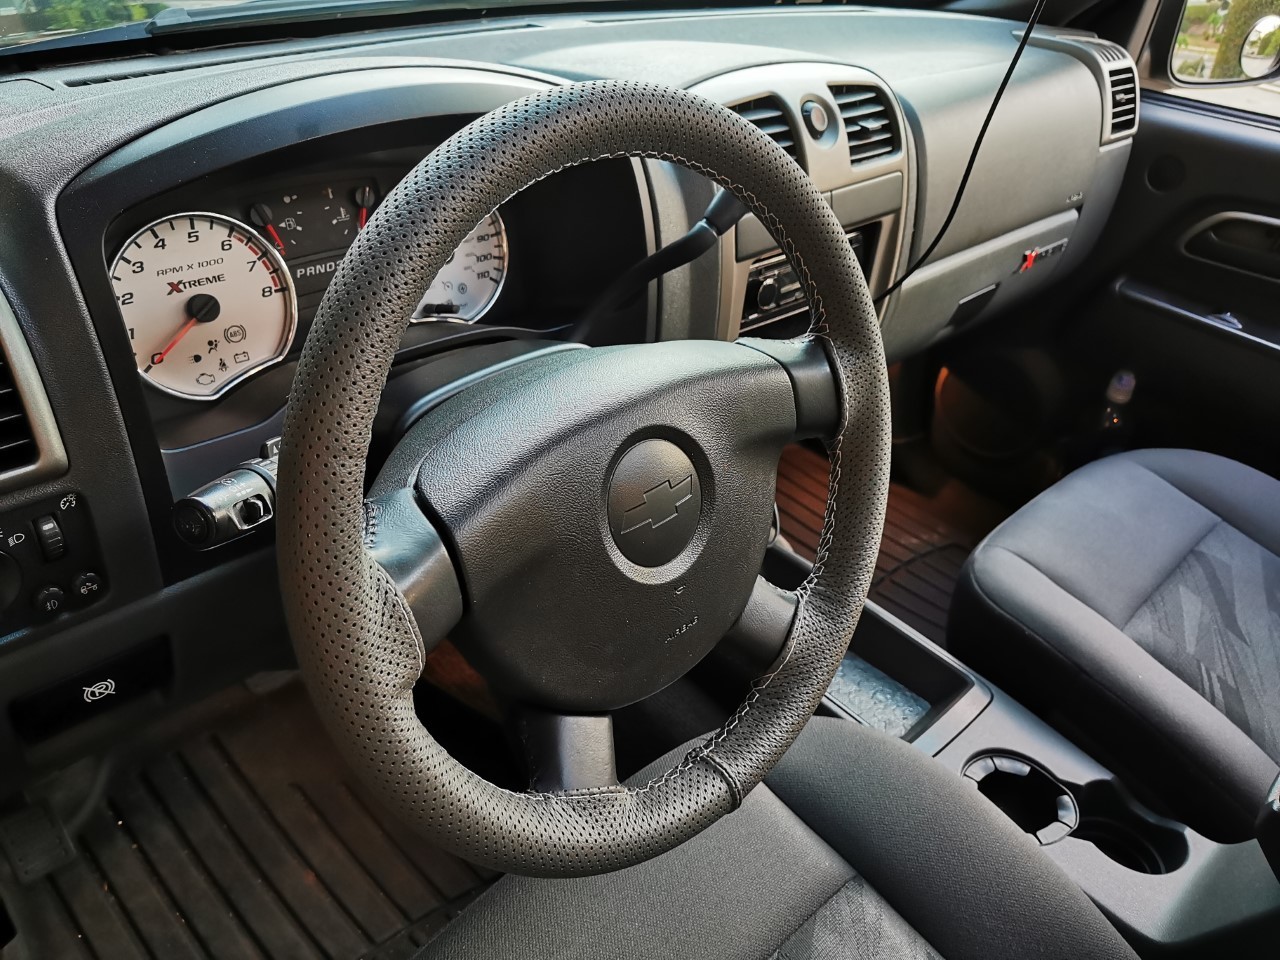 FITS GMC SUV 88-92 GREY PERF LEATHER STEERING WHEEL COVER BLACK SEAM - $54.99